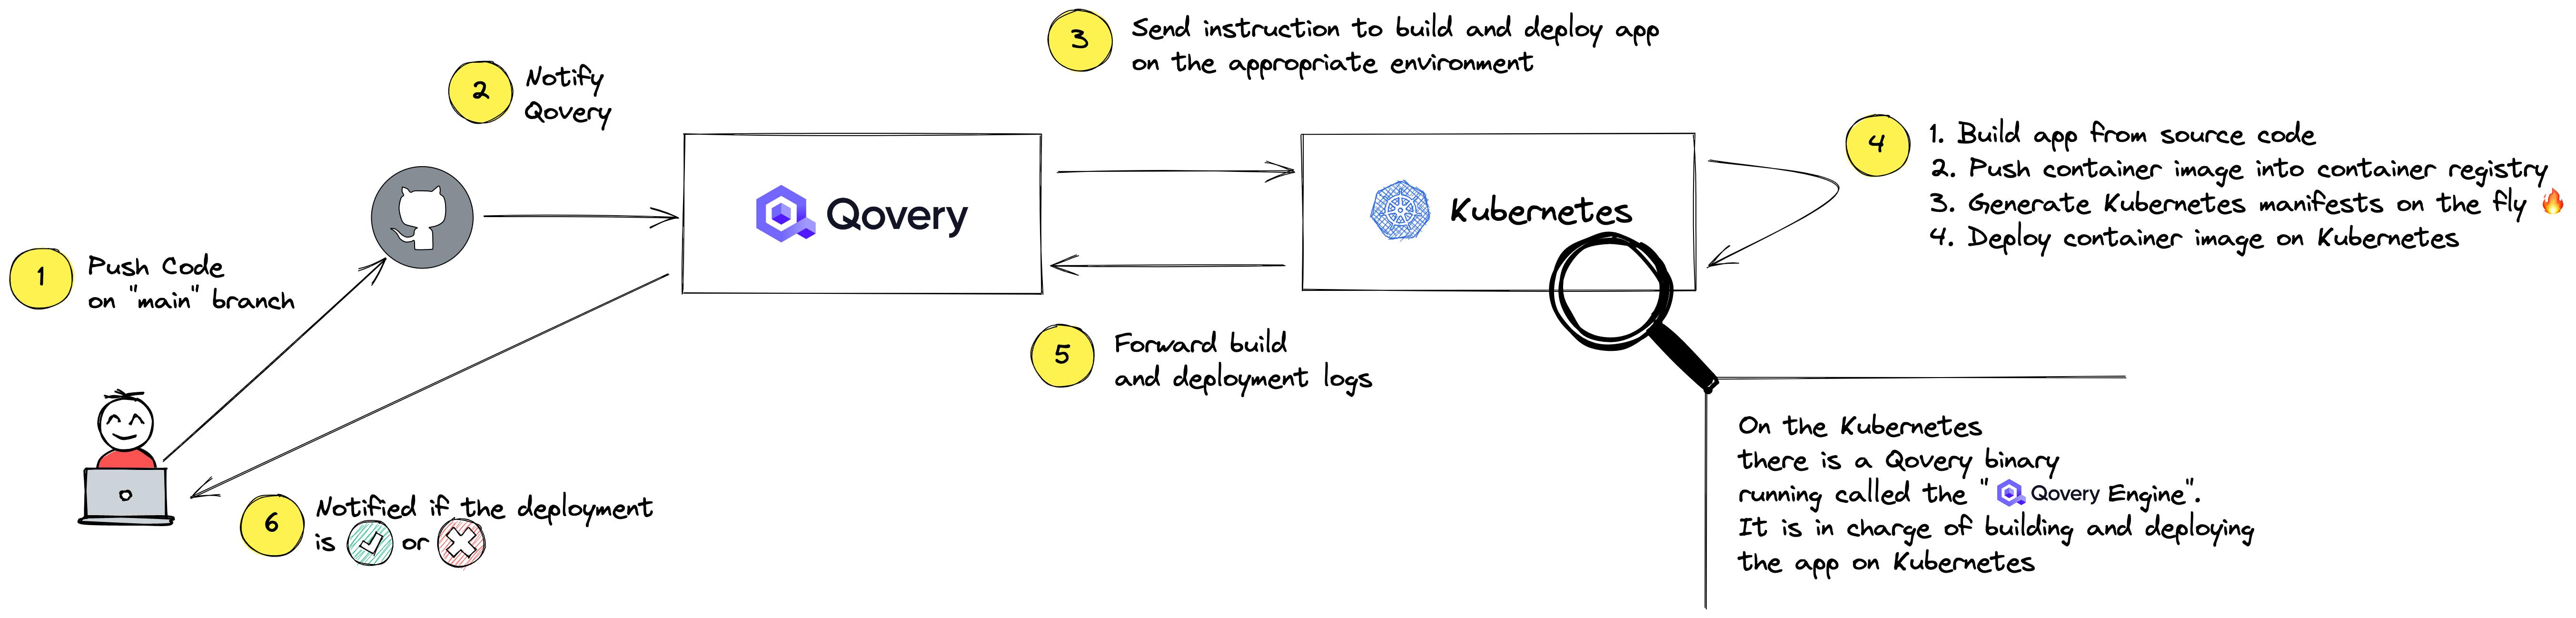 From a simple git push to a complete deployment on Kubernetes. The experience is transparent for the developer.